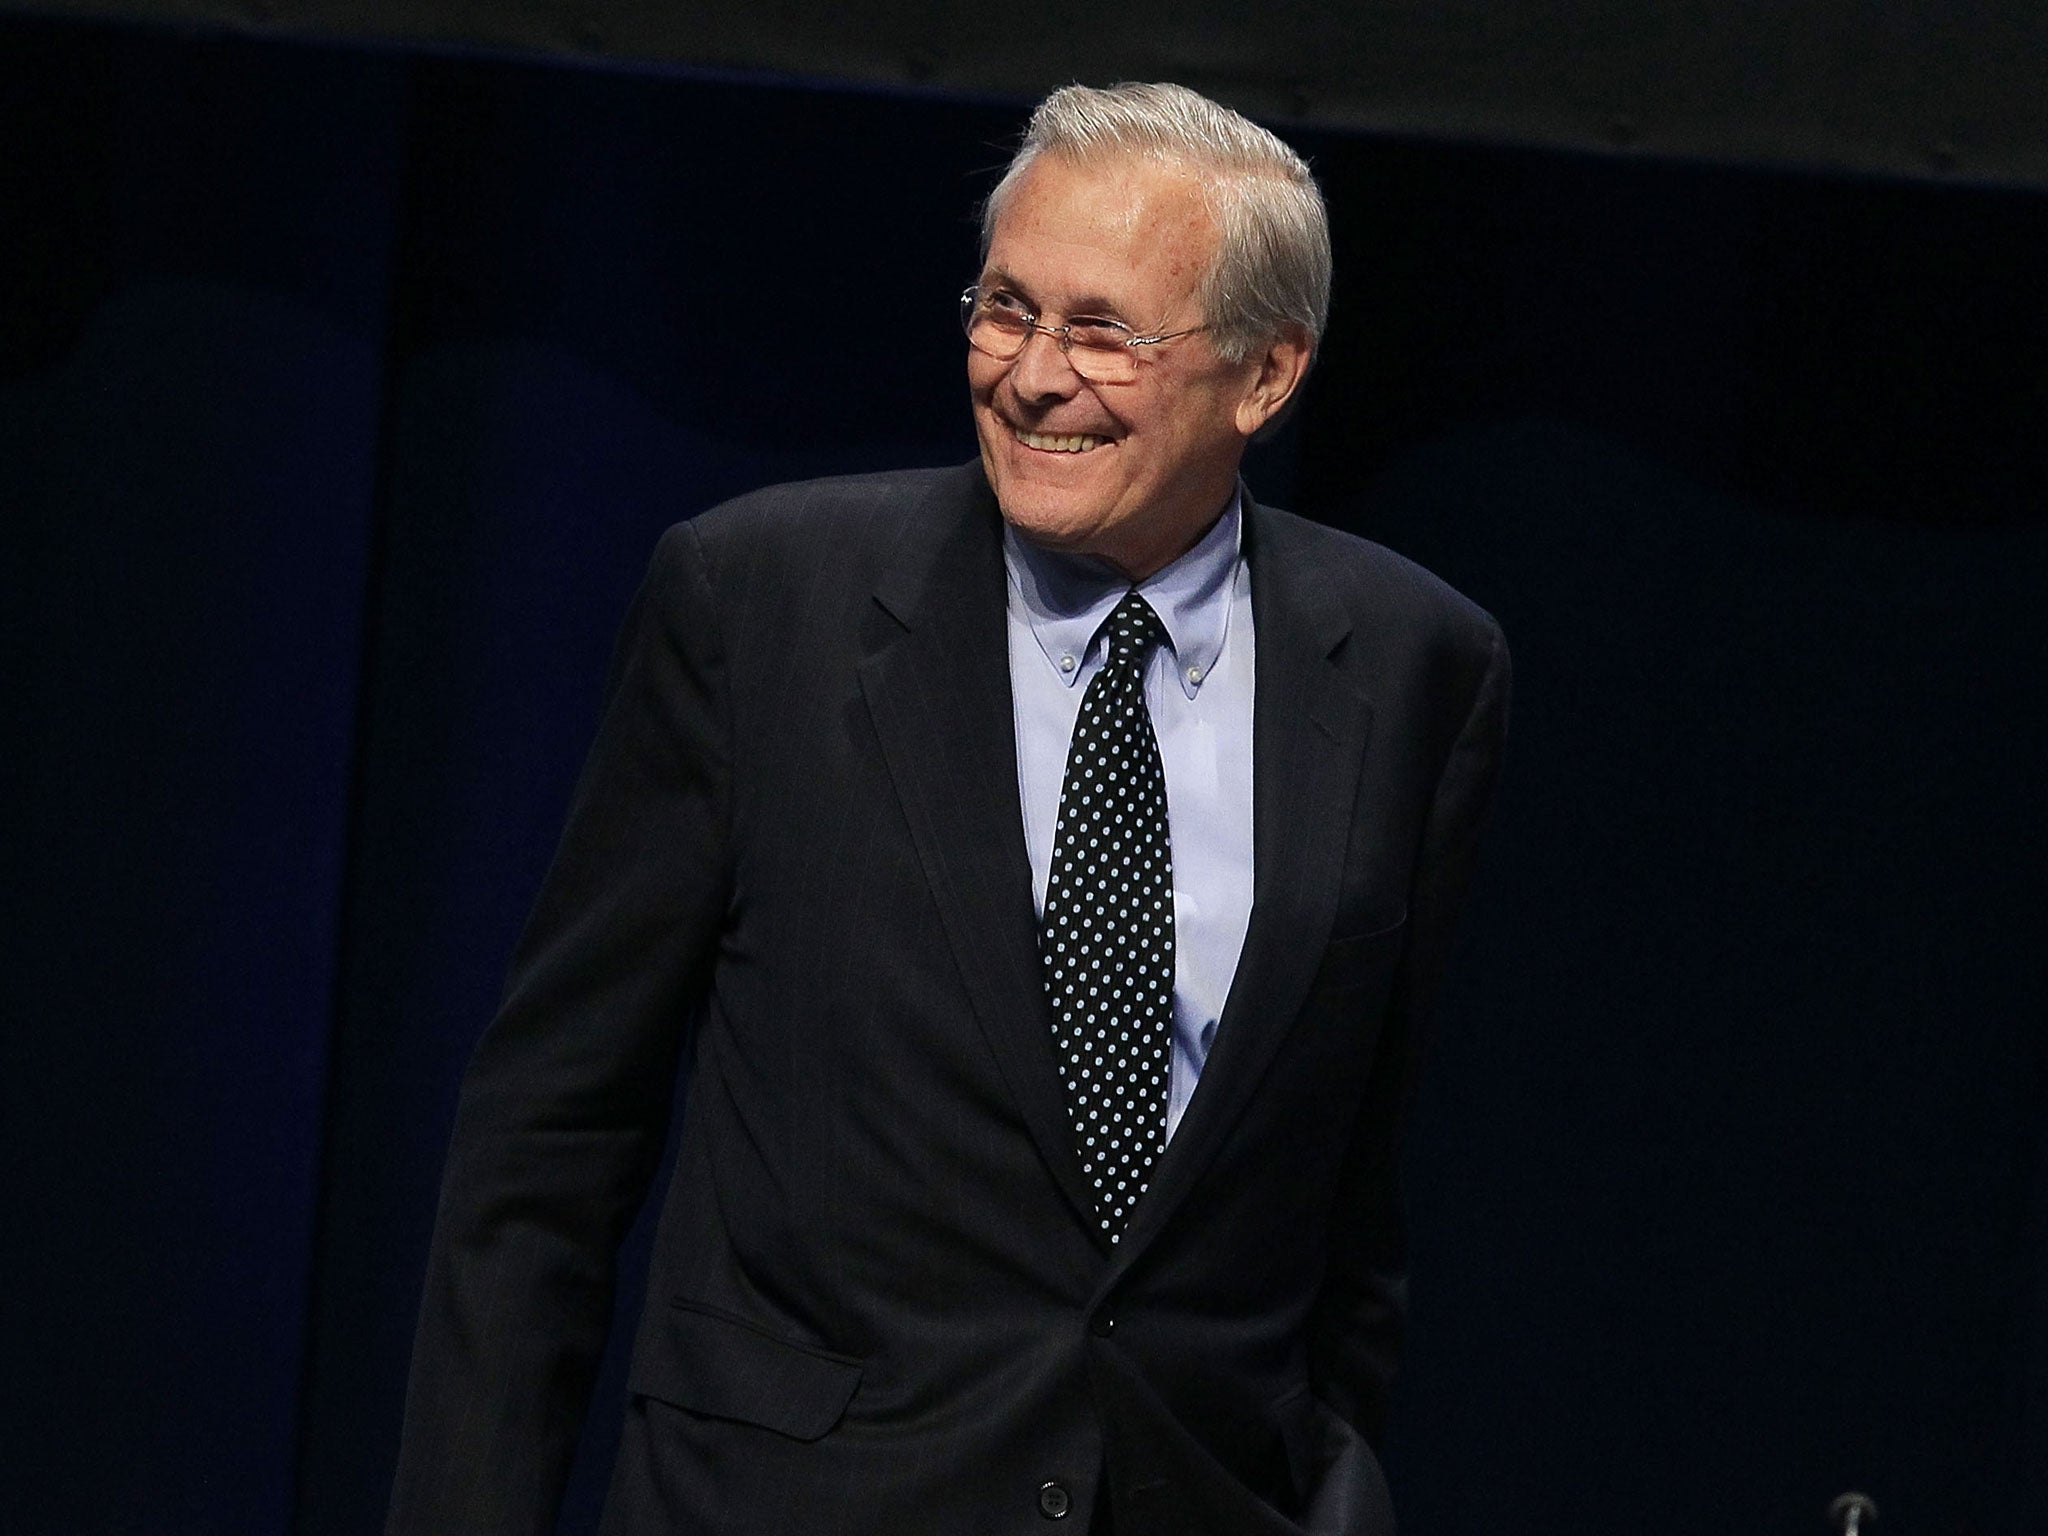 It is the 'unknown unknowns' to use Donald Rumsfeld's famous expression that bite investors on the backside